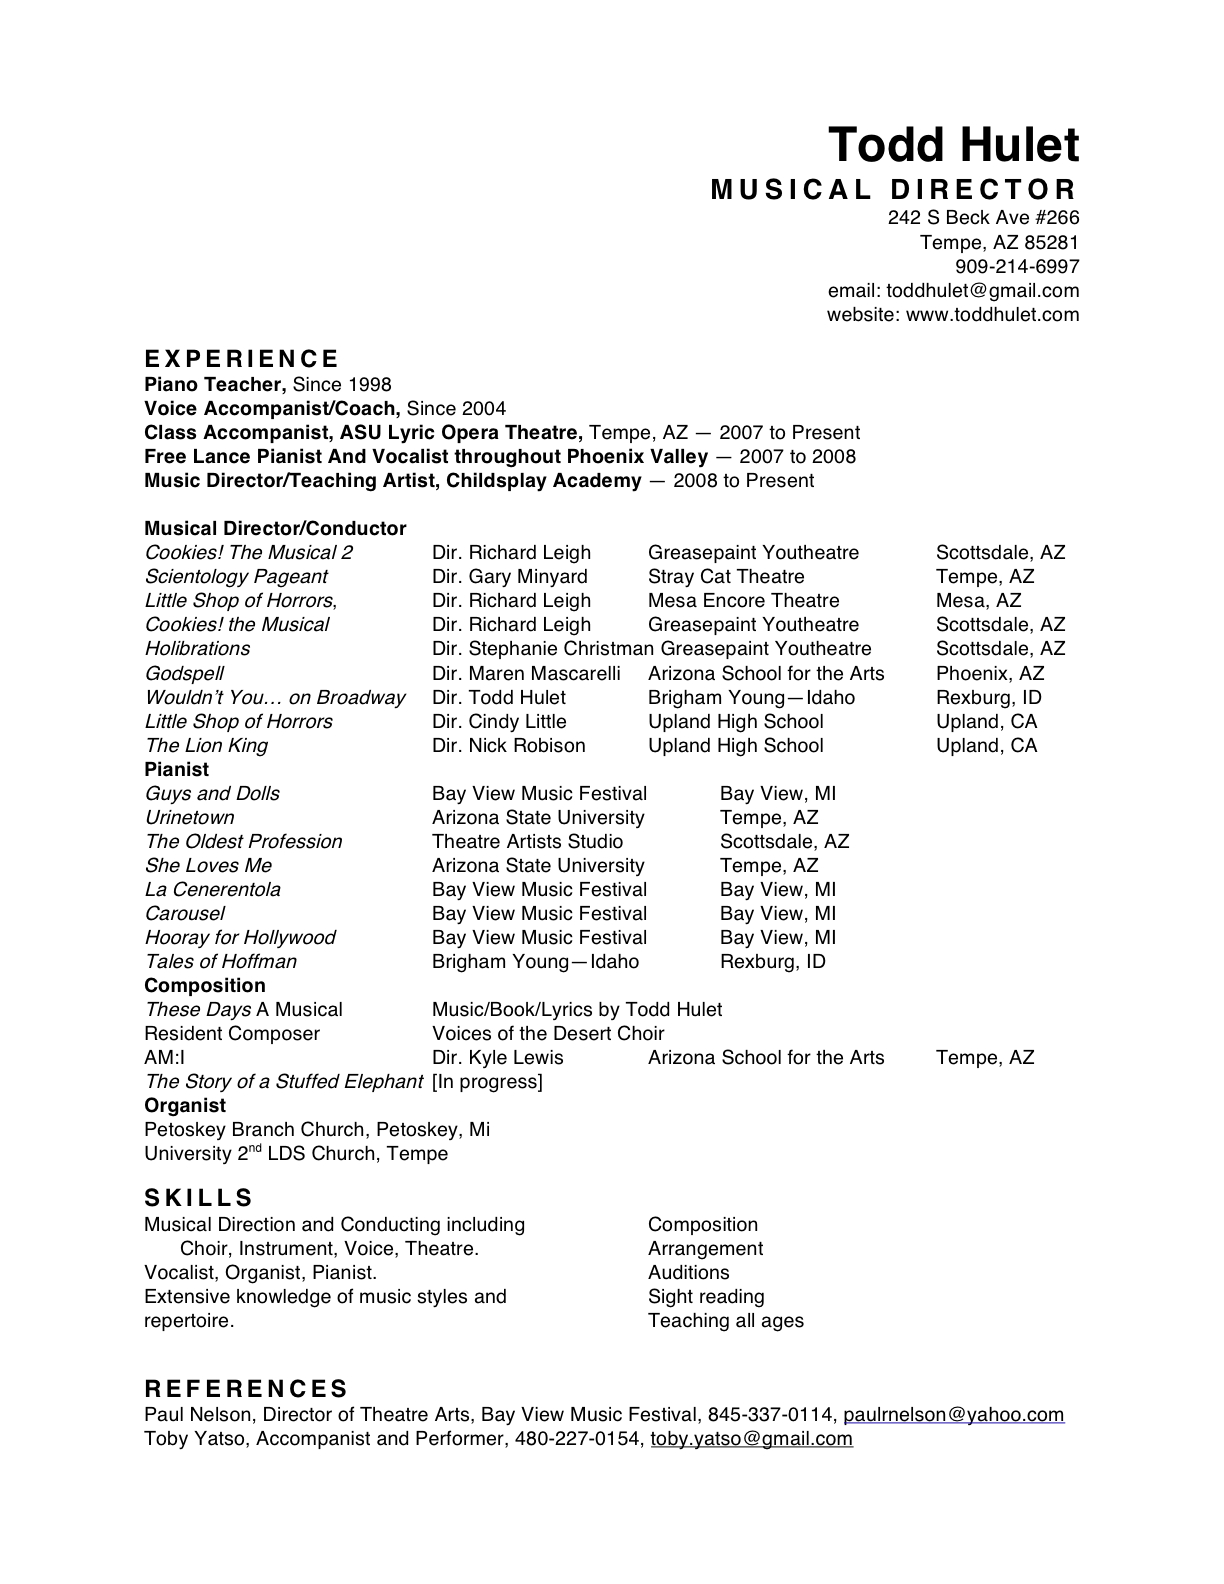 Music Resume Template from toddhulet.weebly.com